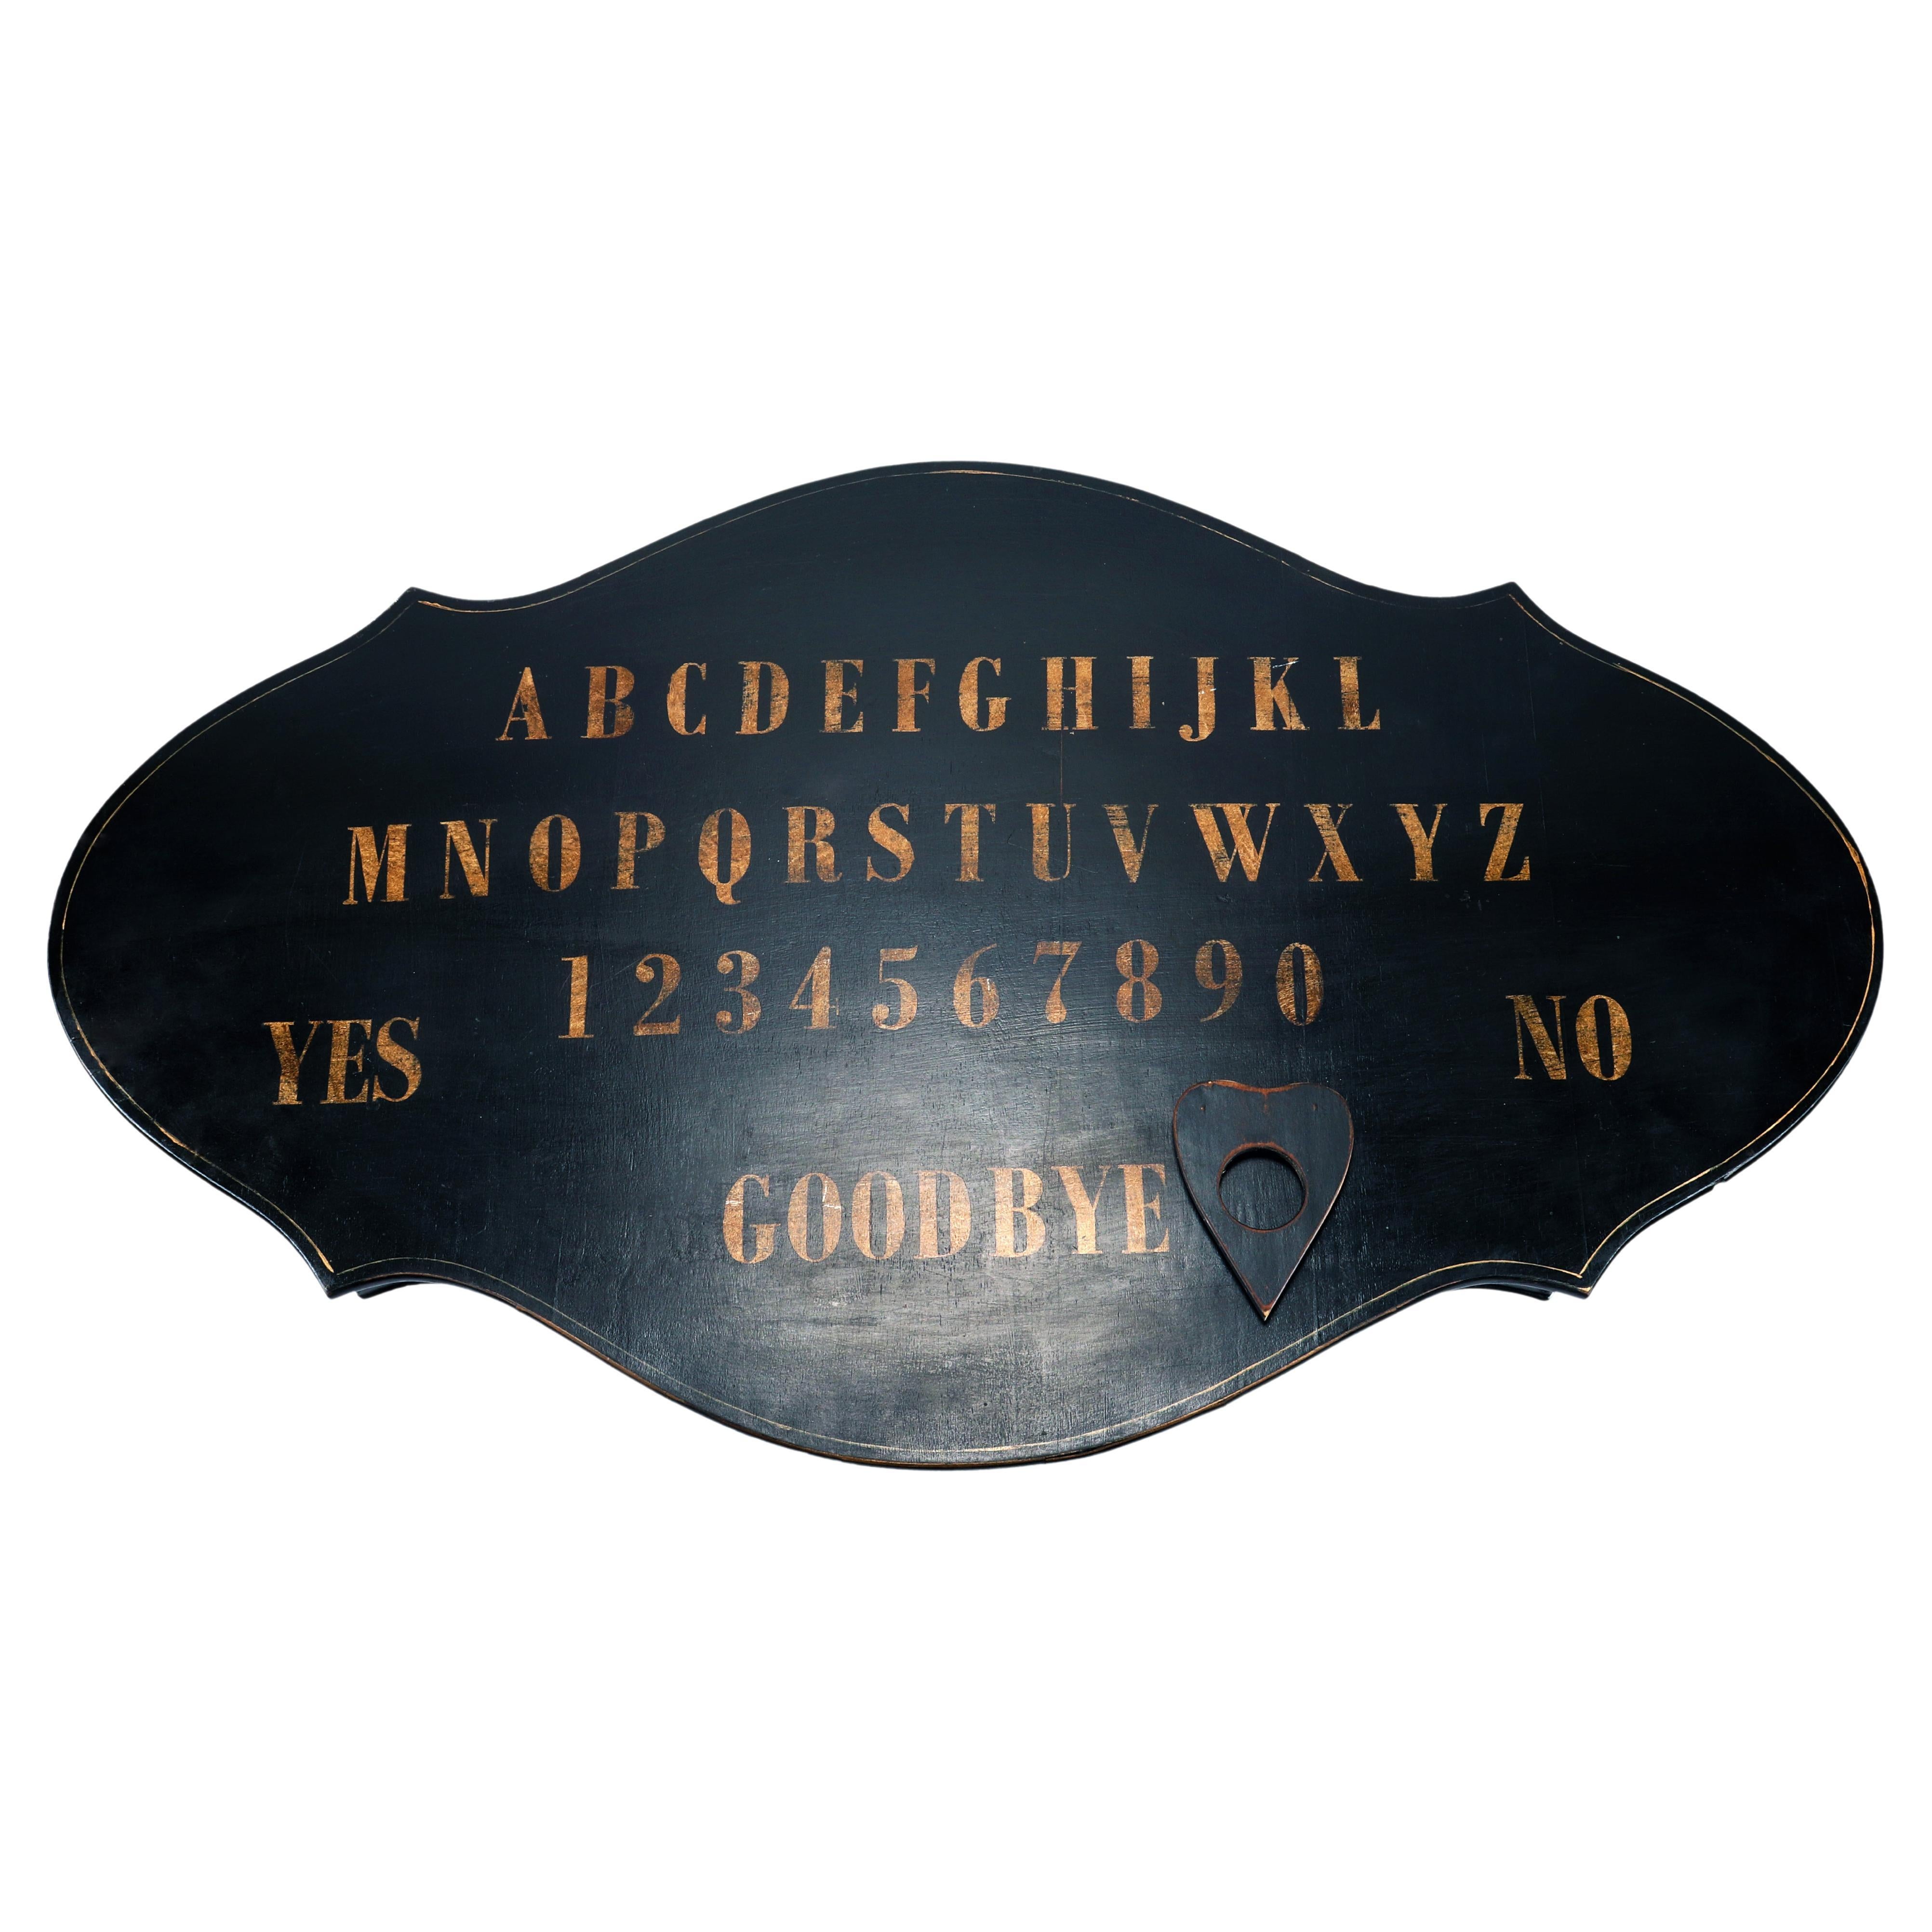 Table Ouija, Used for Séances, United States, 1870